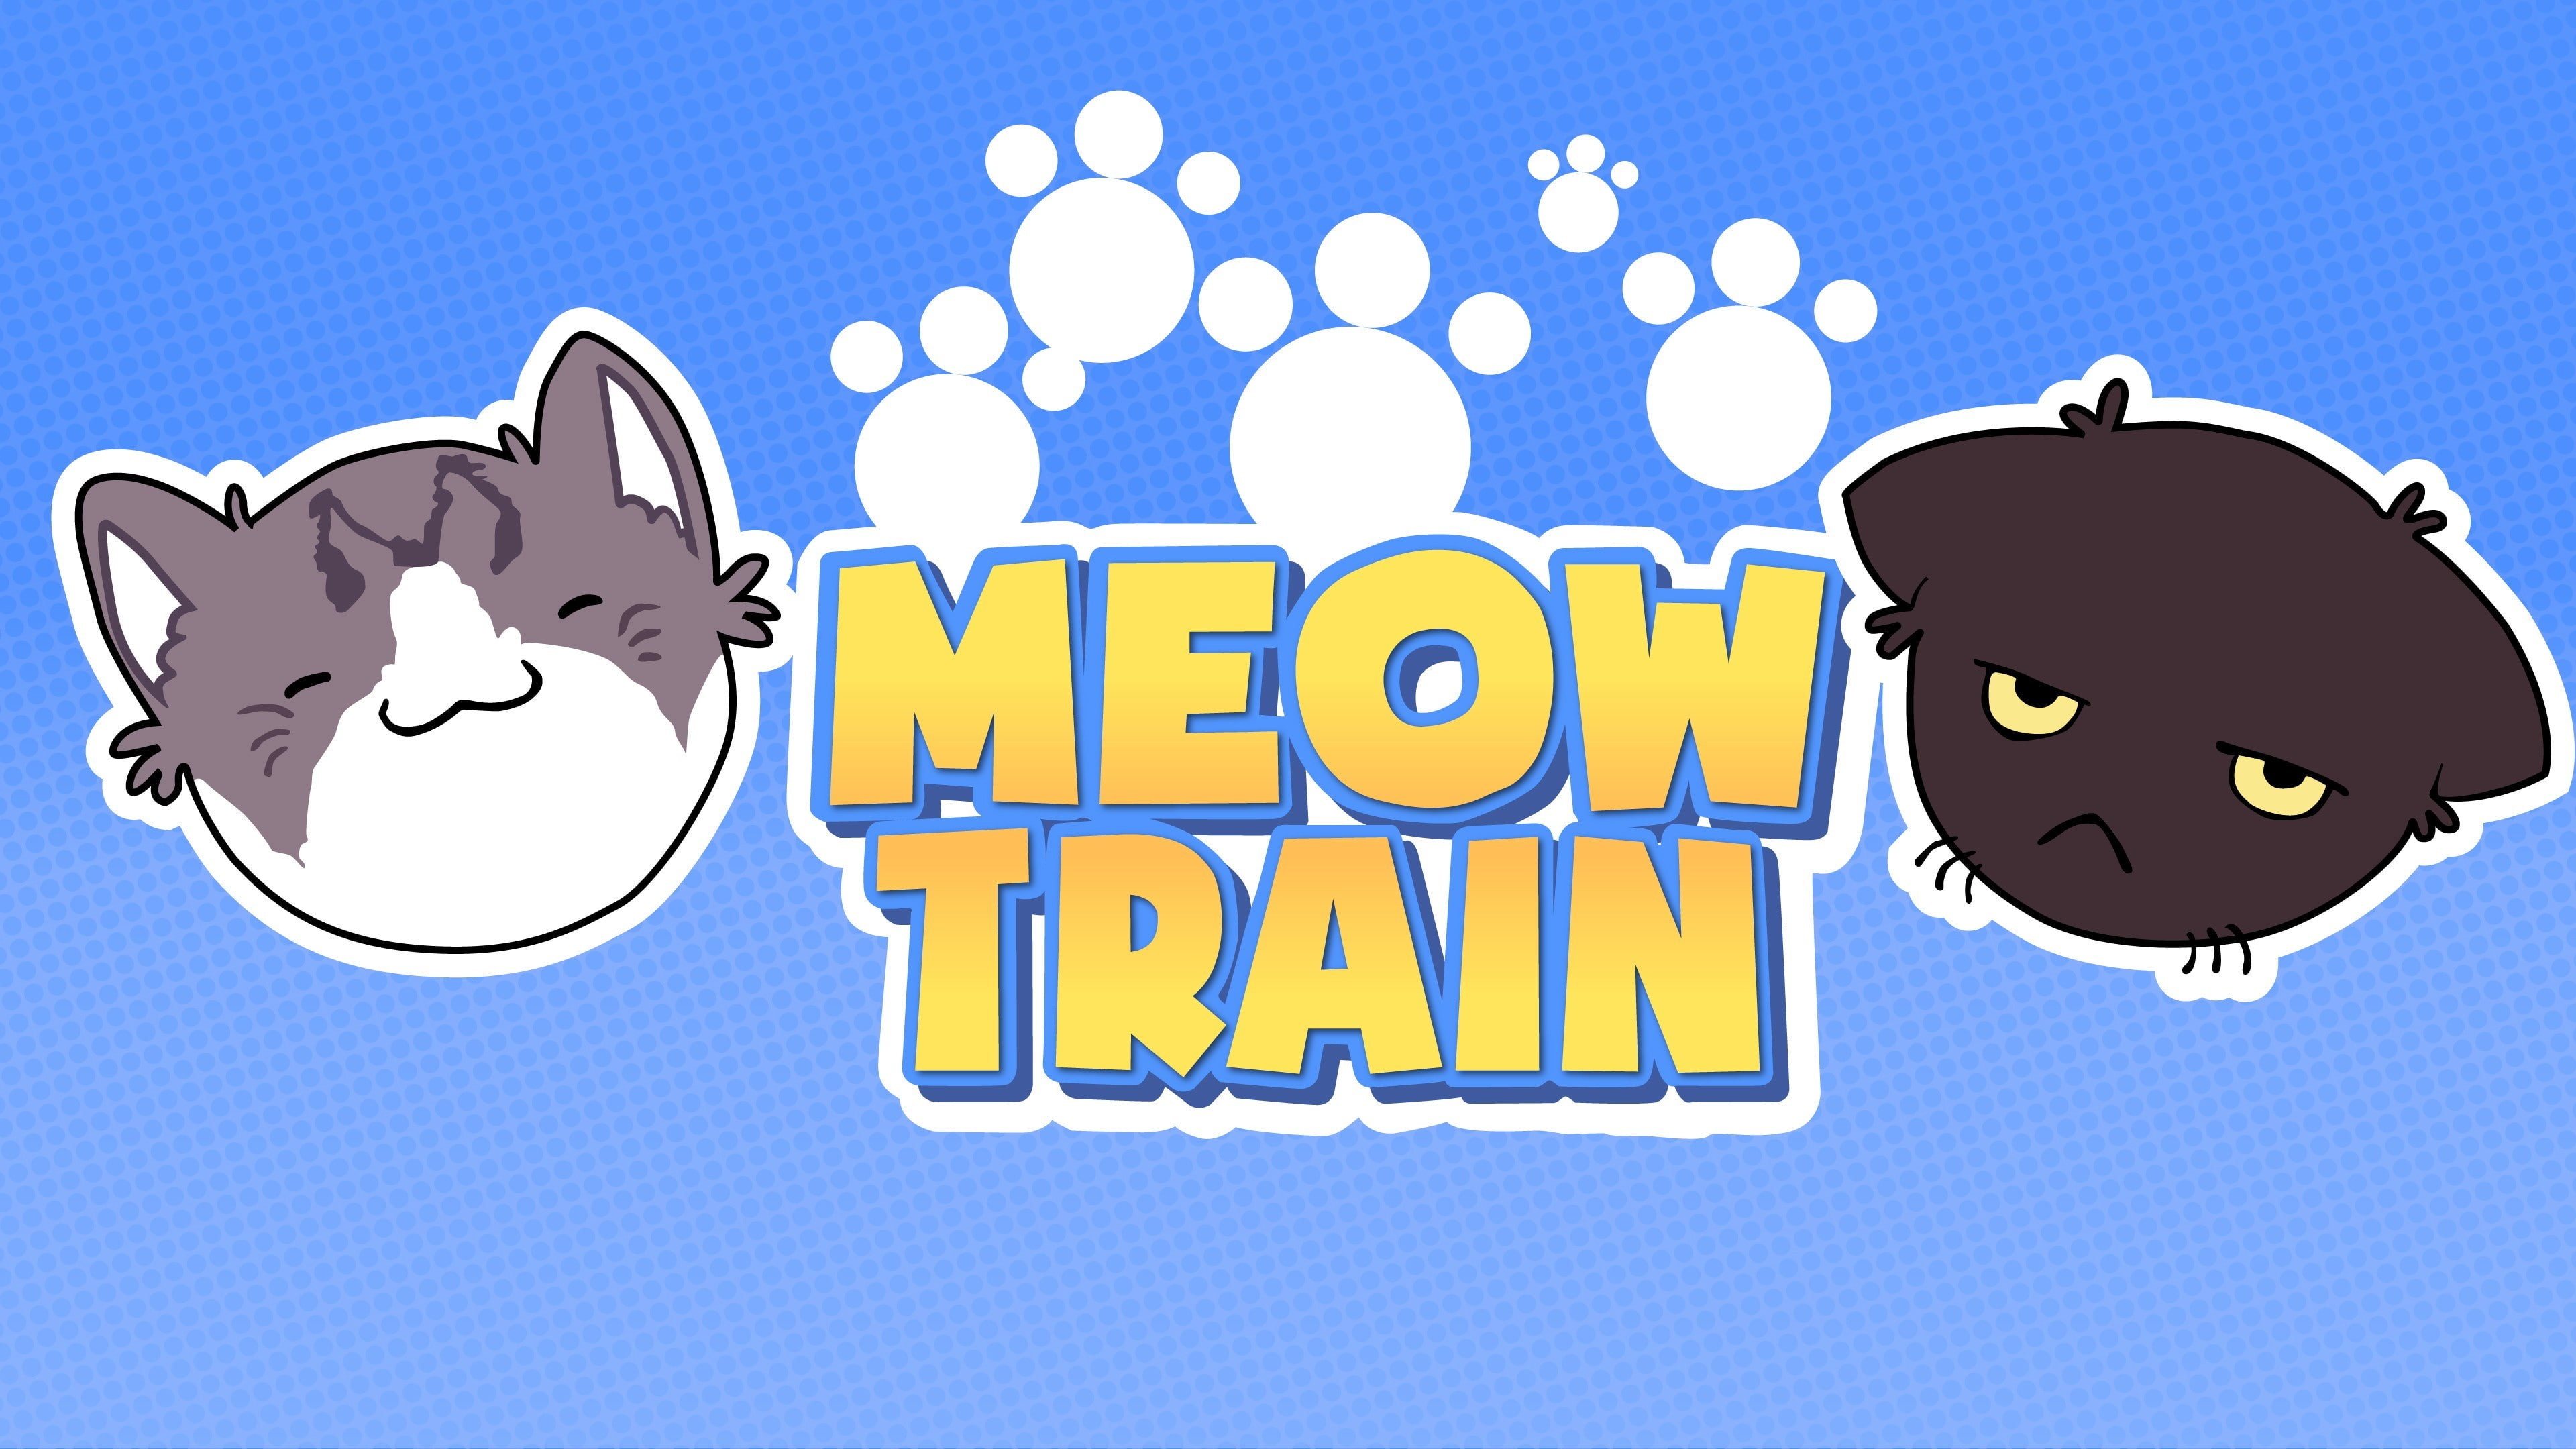 game grumps steam train video games youtube cat, communication